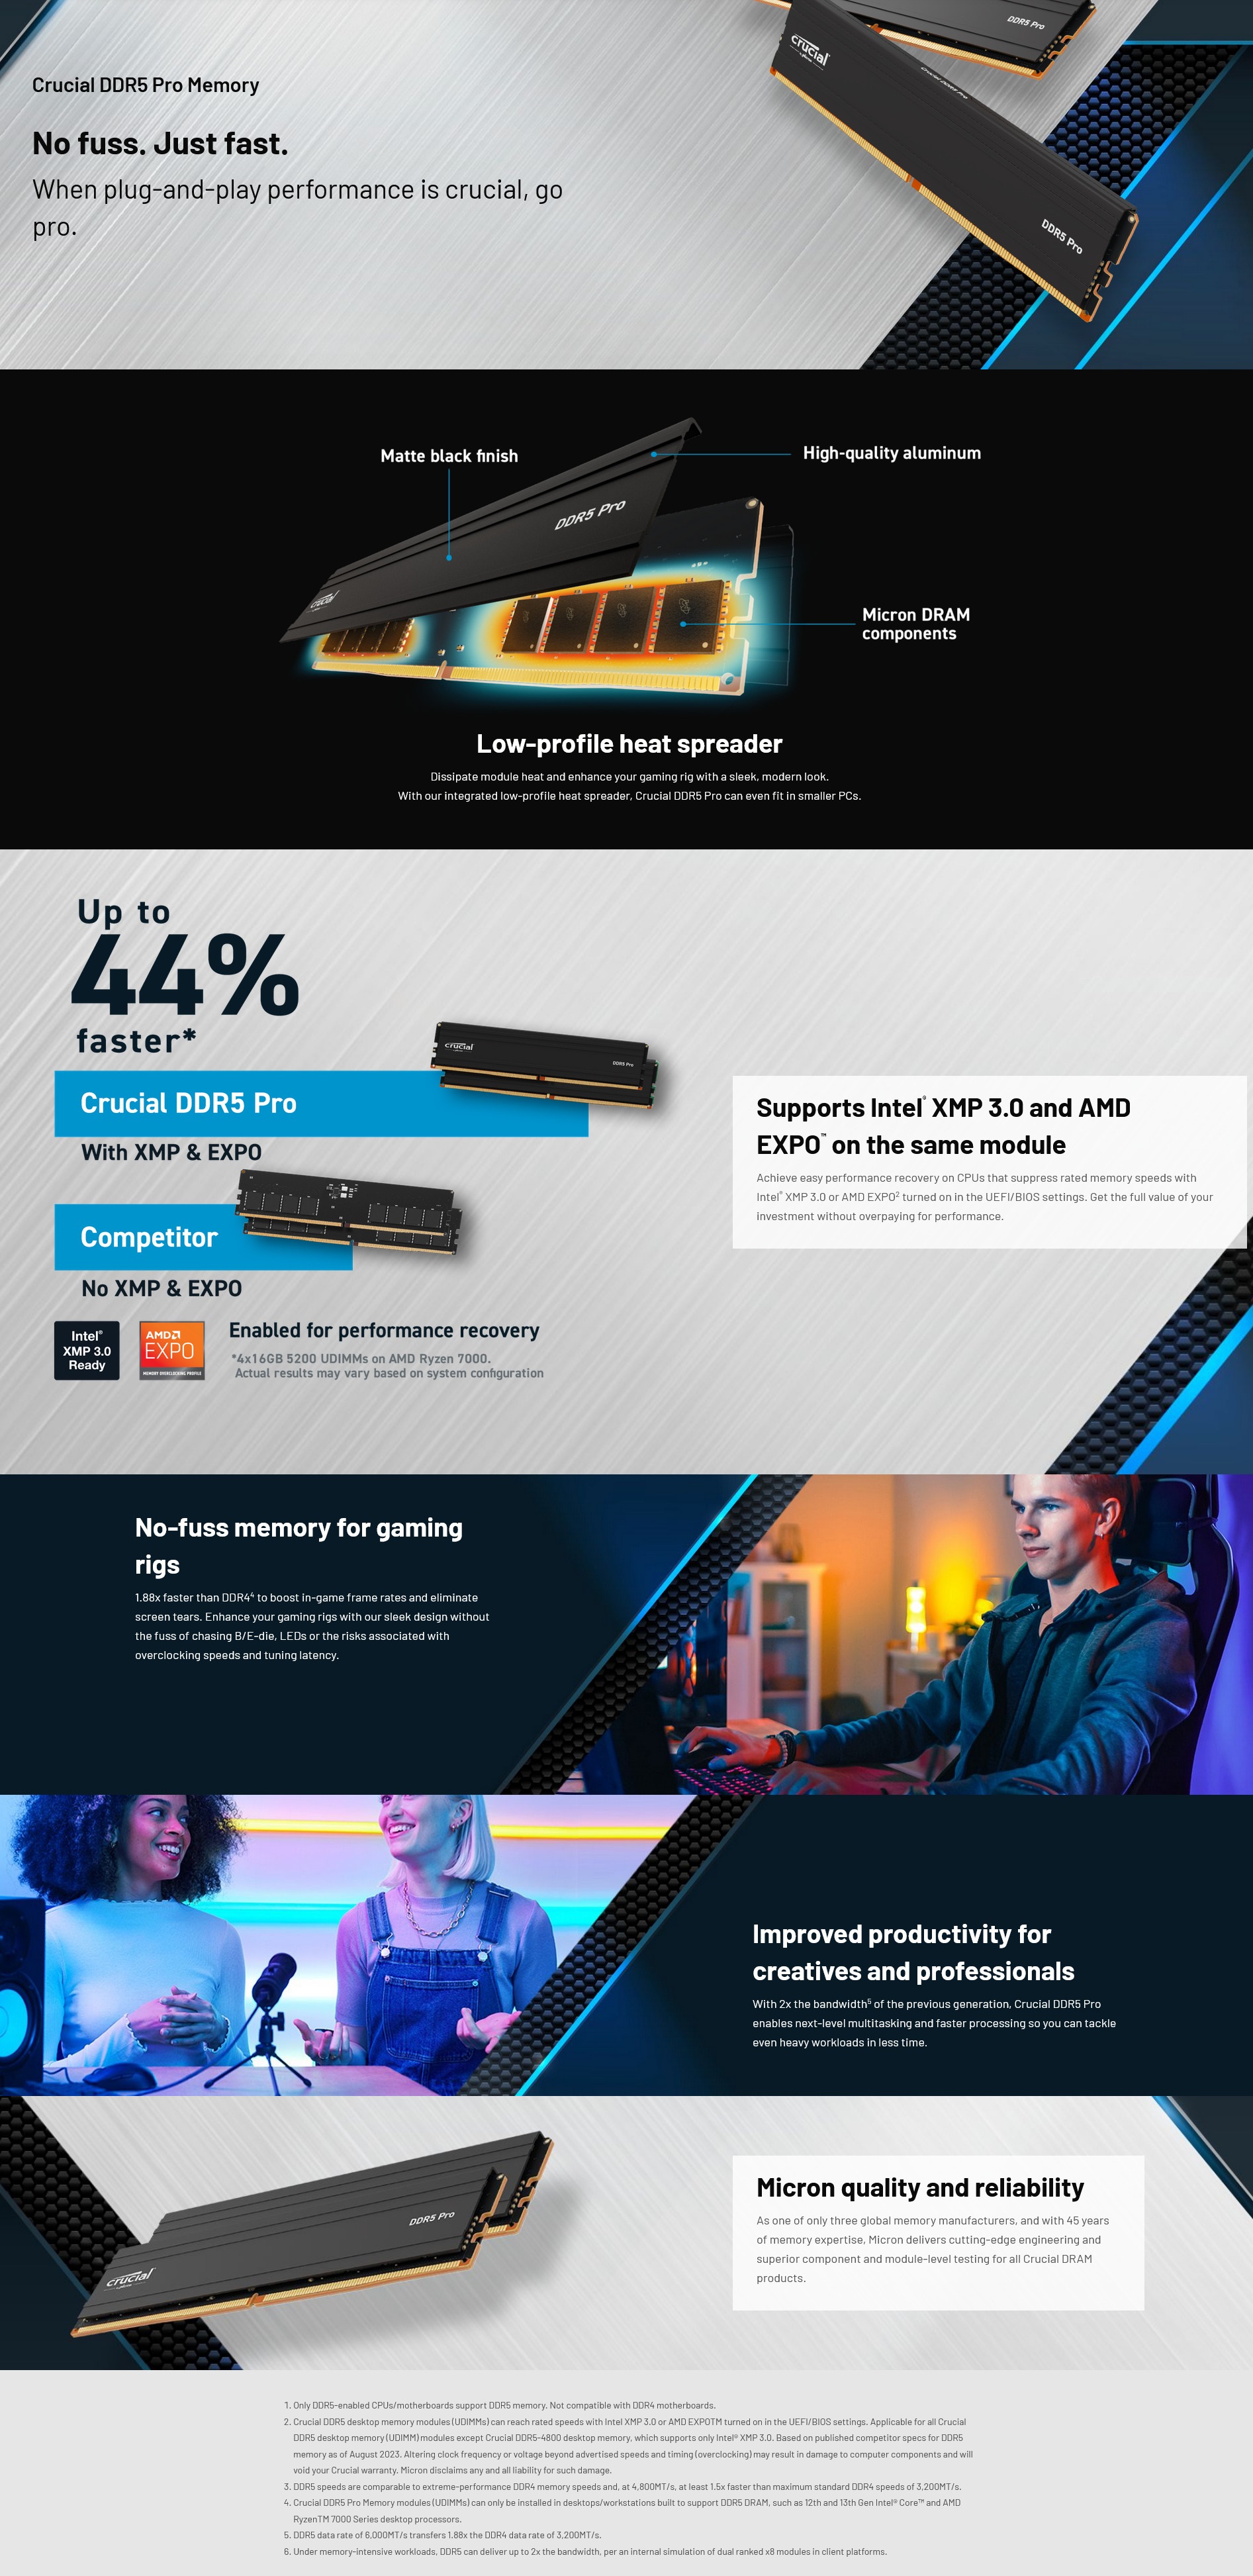 A large marketing image providing additional information about the product Crucial Pro 32GB Kit (2x16GB) DDR5 CL48 6000MHz - Additional alt info not provided